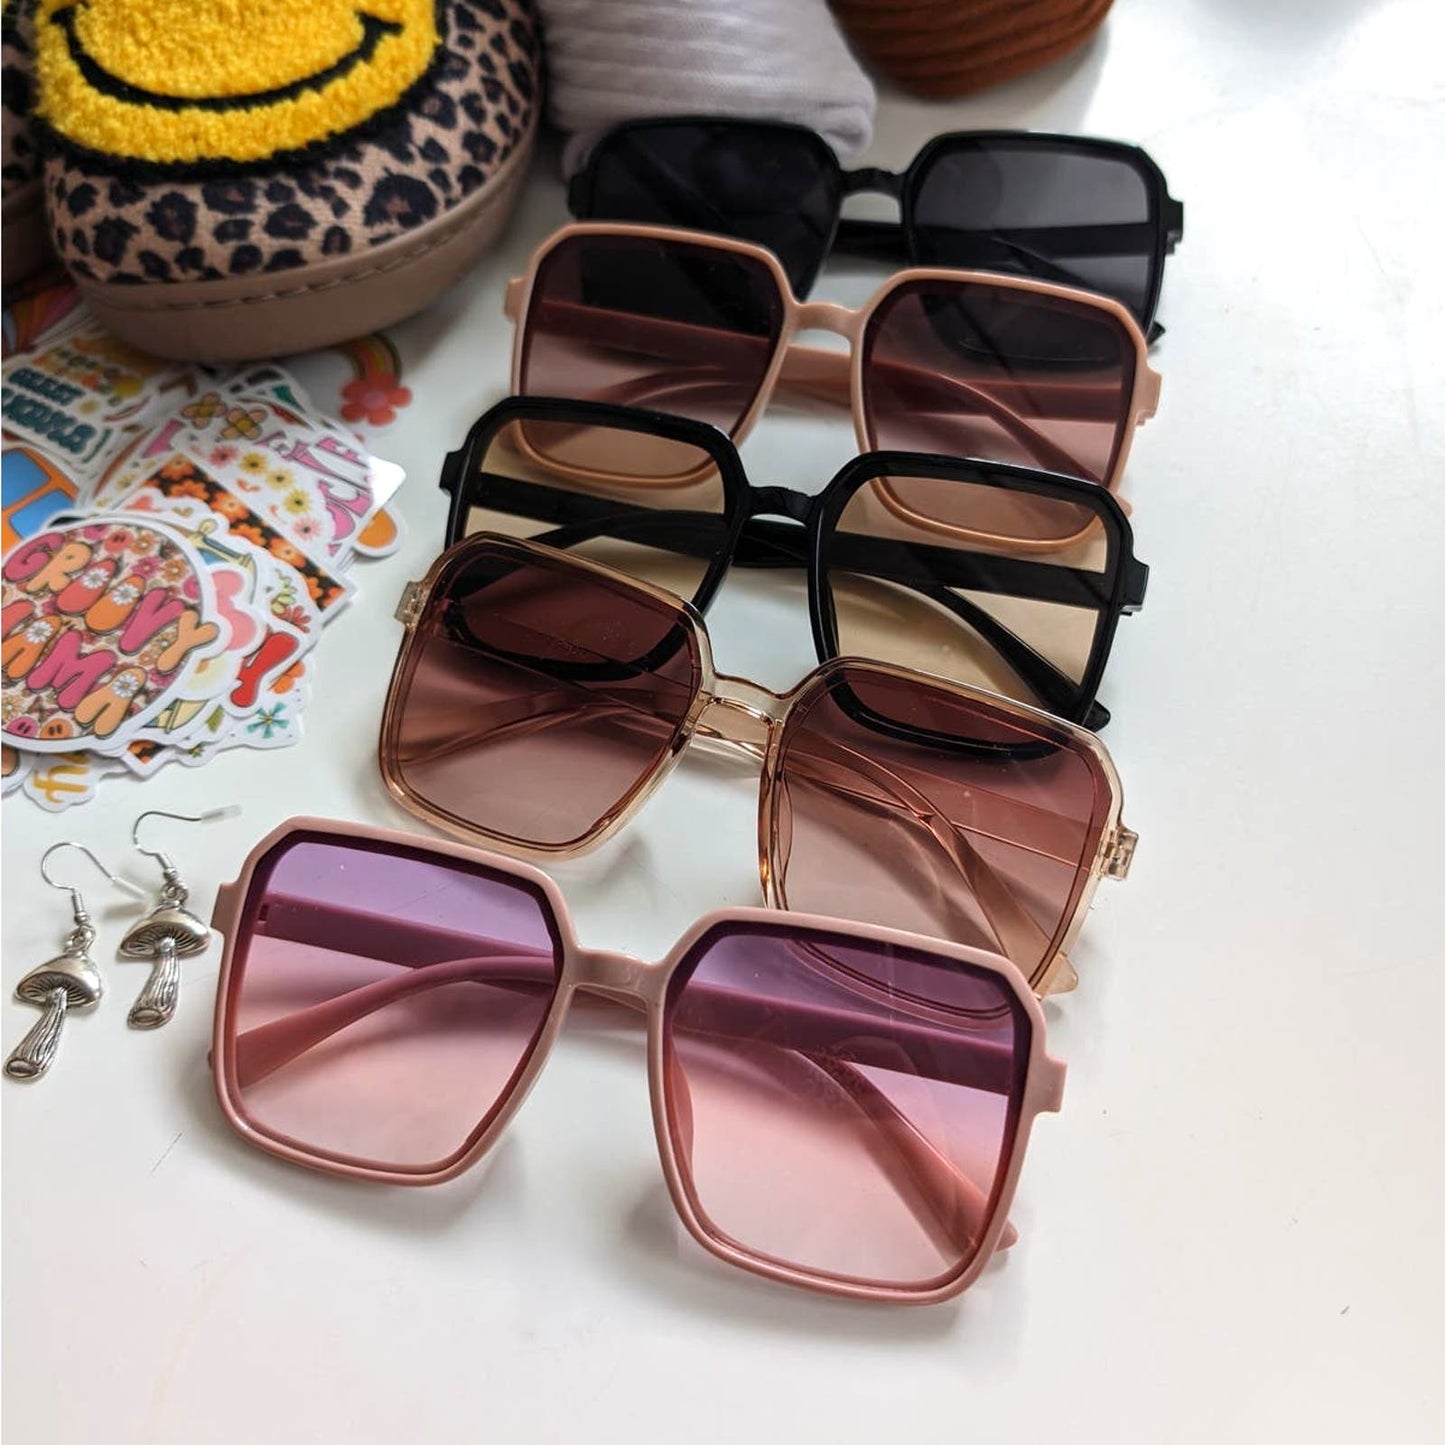 Retro Pink Square Mob Wife Festival Sunglasses Barbie Chic Tinted Sunnies Shades